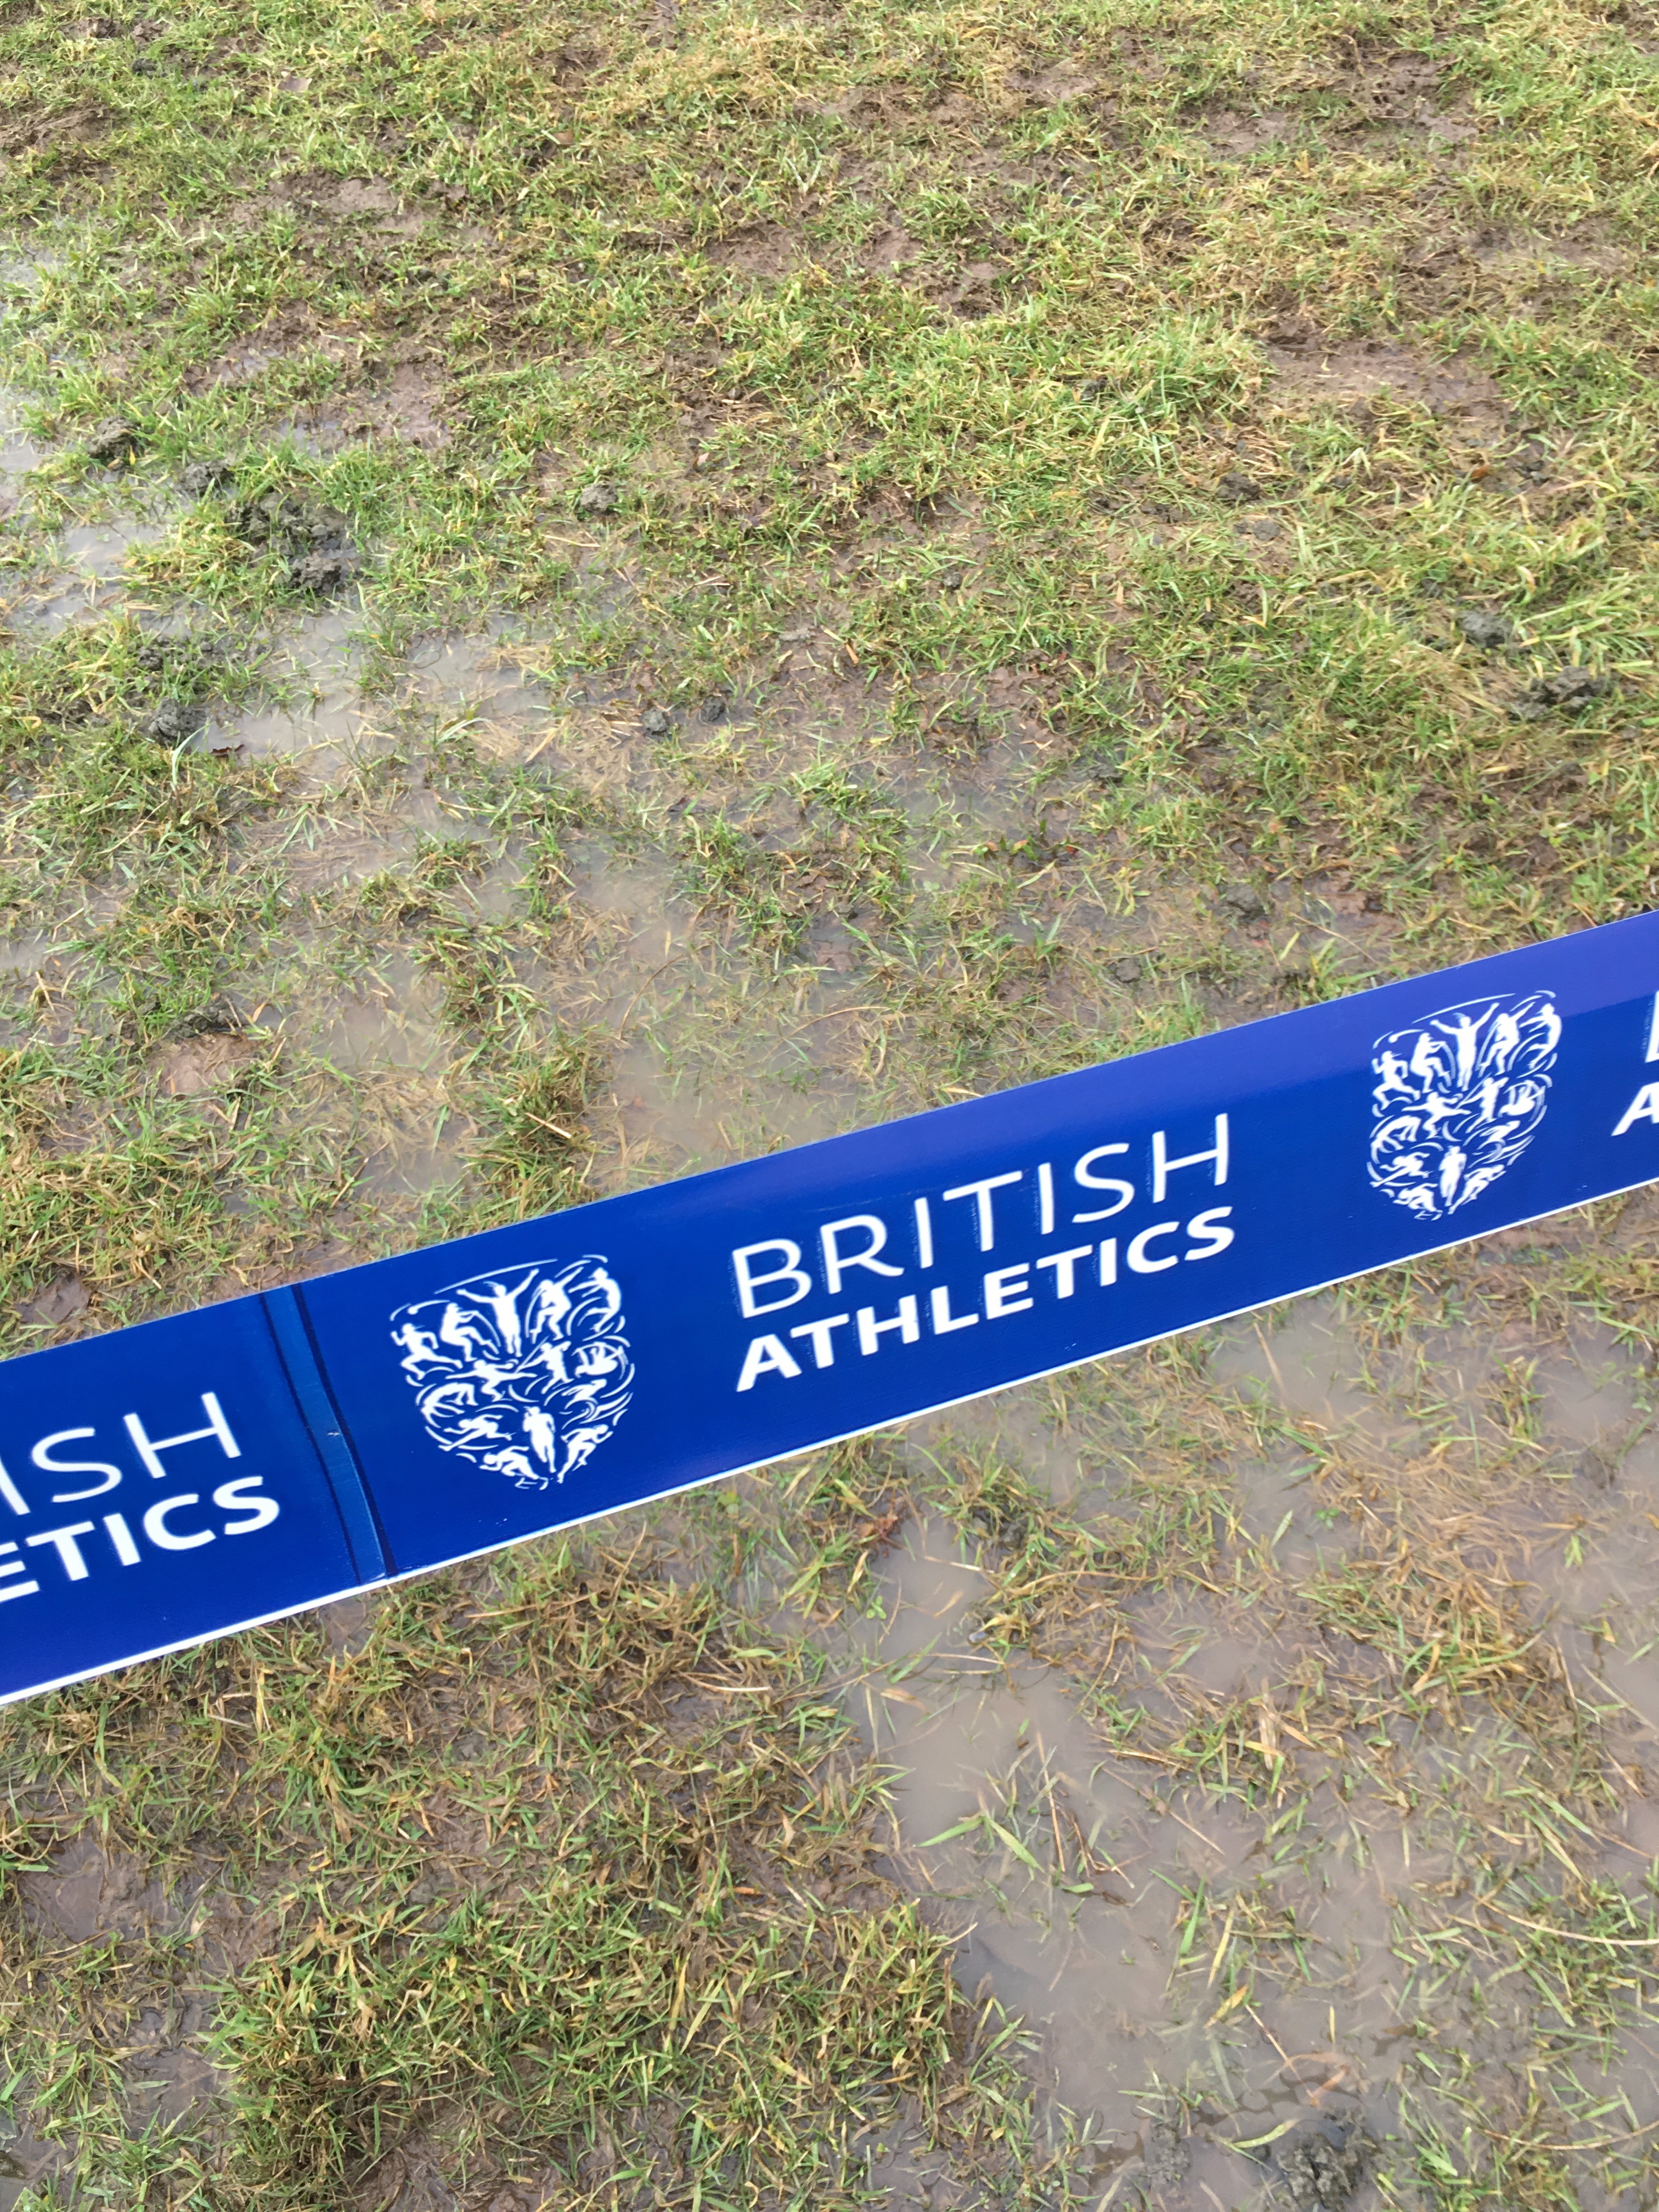 Intercounties Cross Country Championships – 10/3/2108